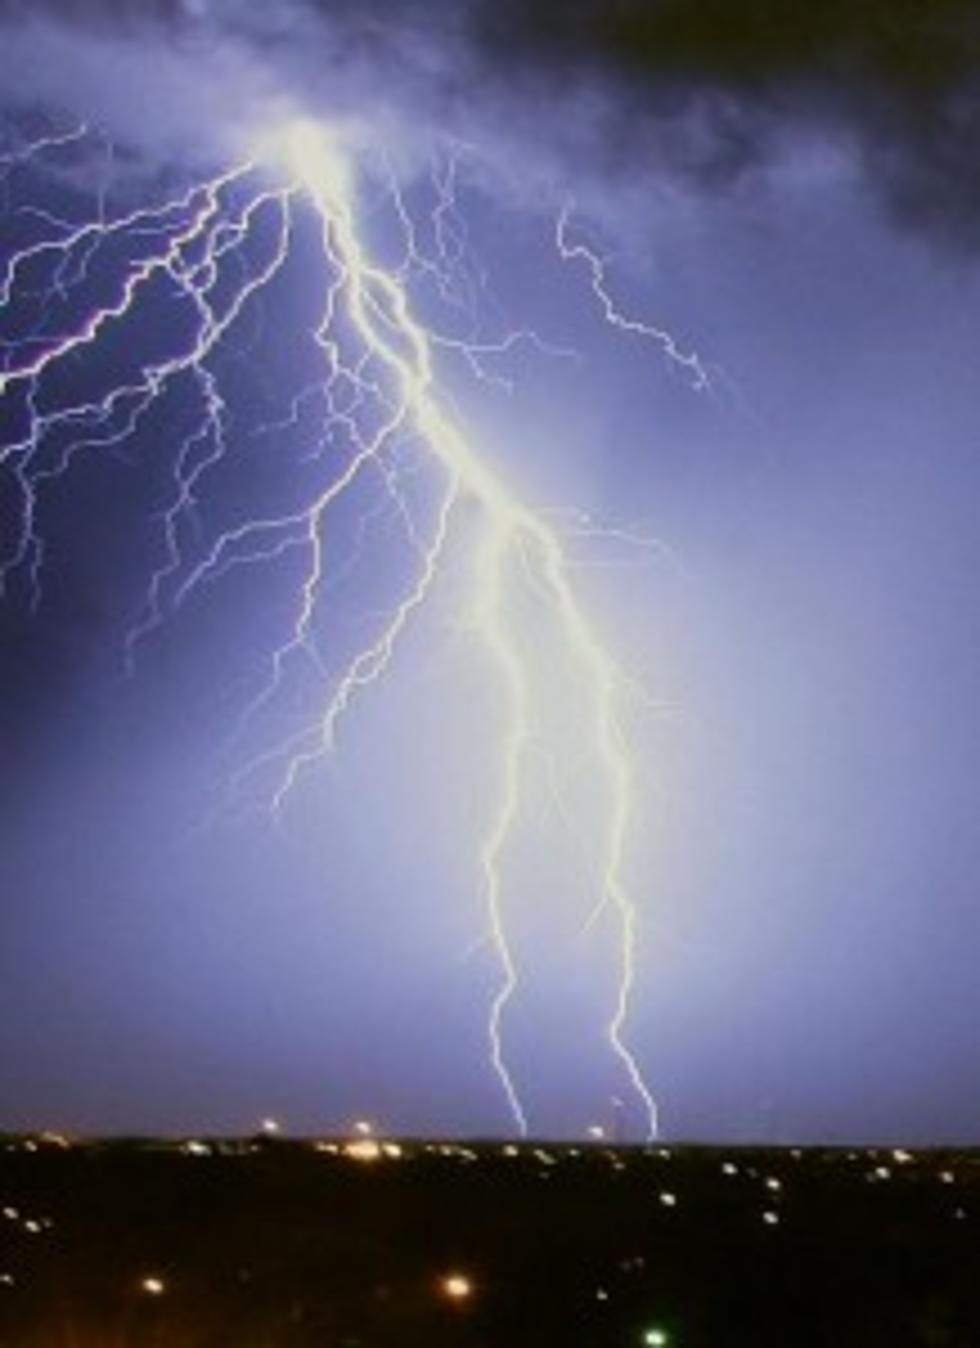 Facts About Lightning That May &#8220;Shock&#8221; You